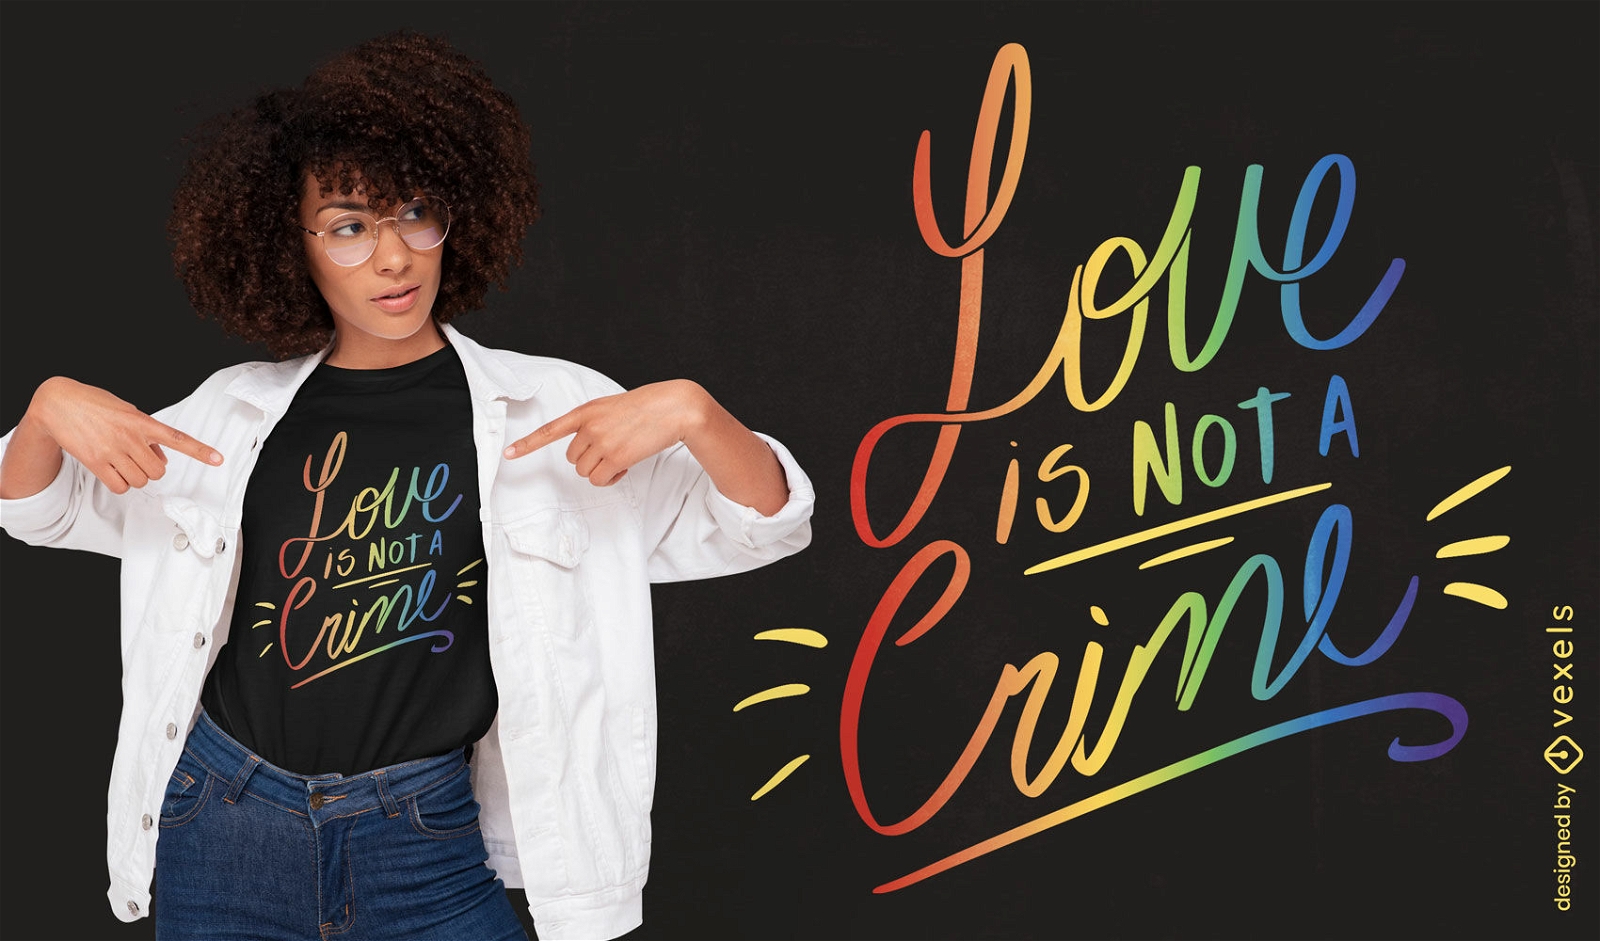 Love is not a crime pride quote lettering